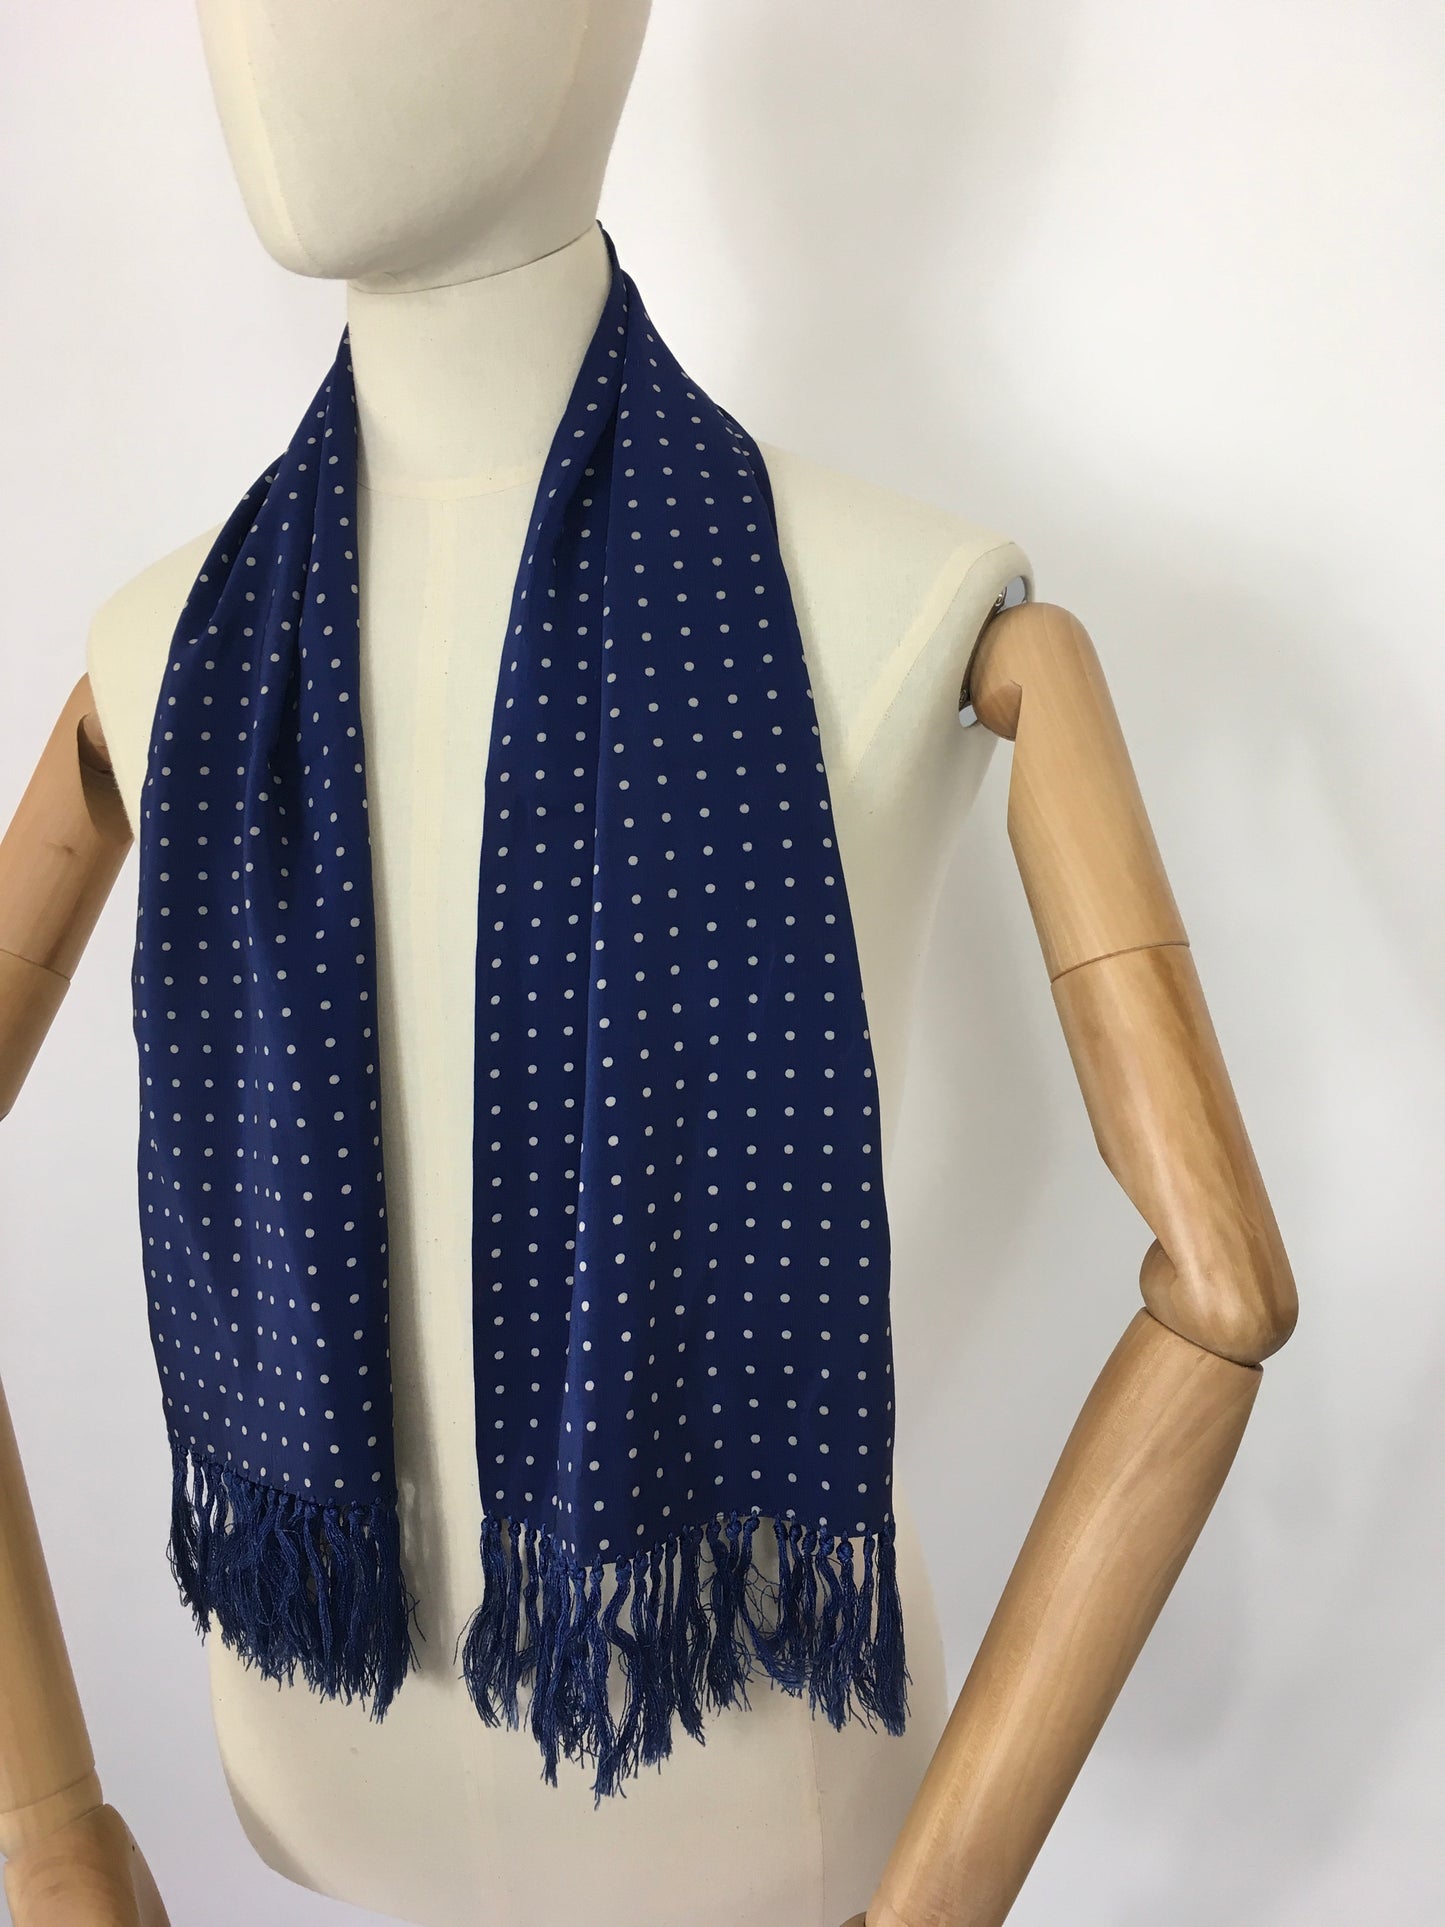 Original 1940’s Mens ‘  Tootal ‘ Silk Scarf - In a Lovely Airforce Blue and White Polka Dot